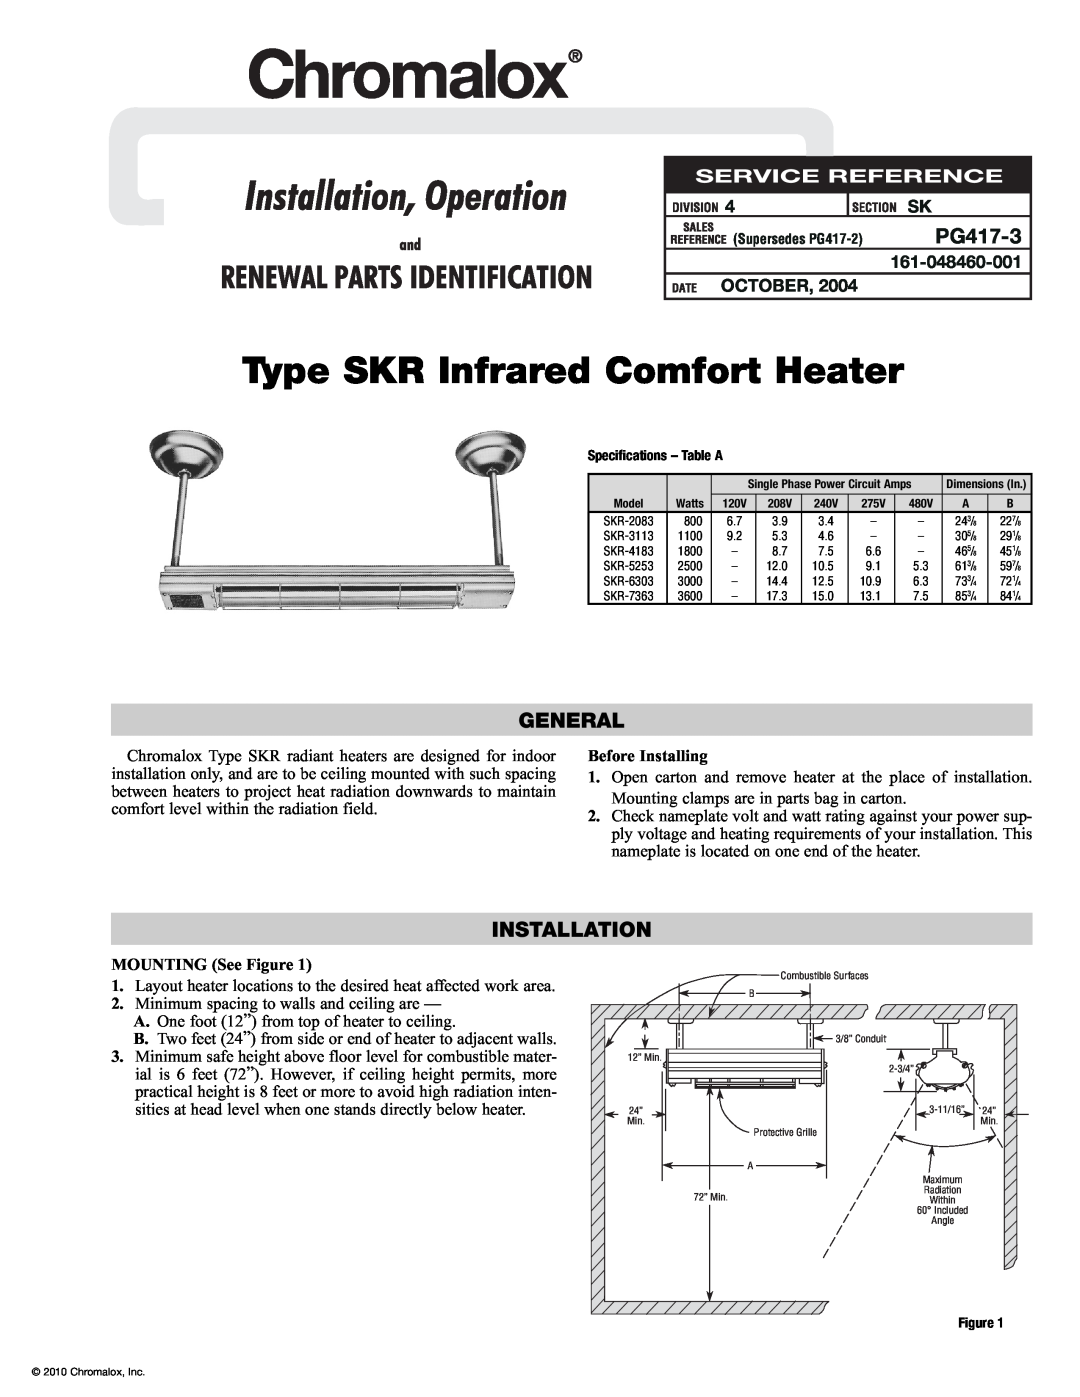 Chromalox PG417-3 specifications General, Installation, Before Installing, MOUNTING See Figure, October 